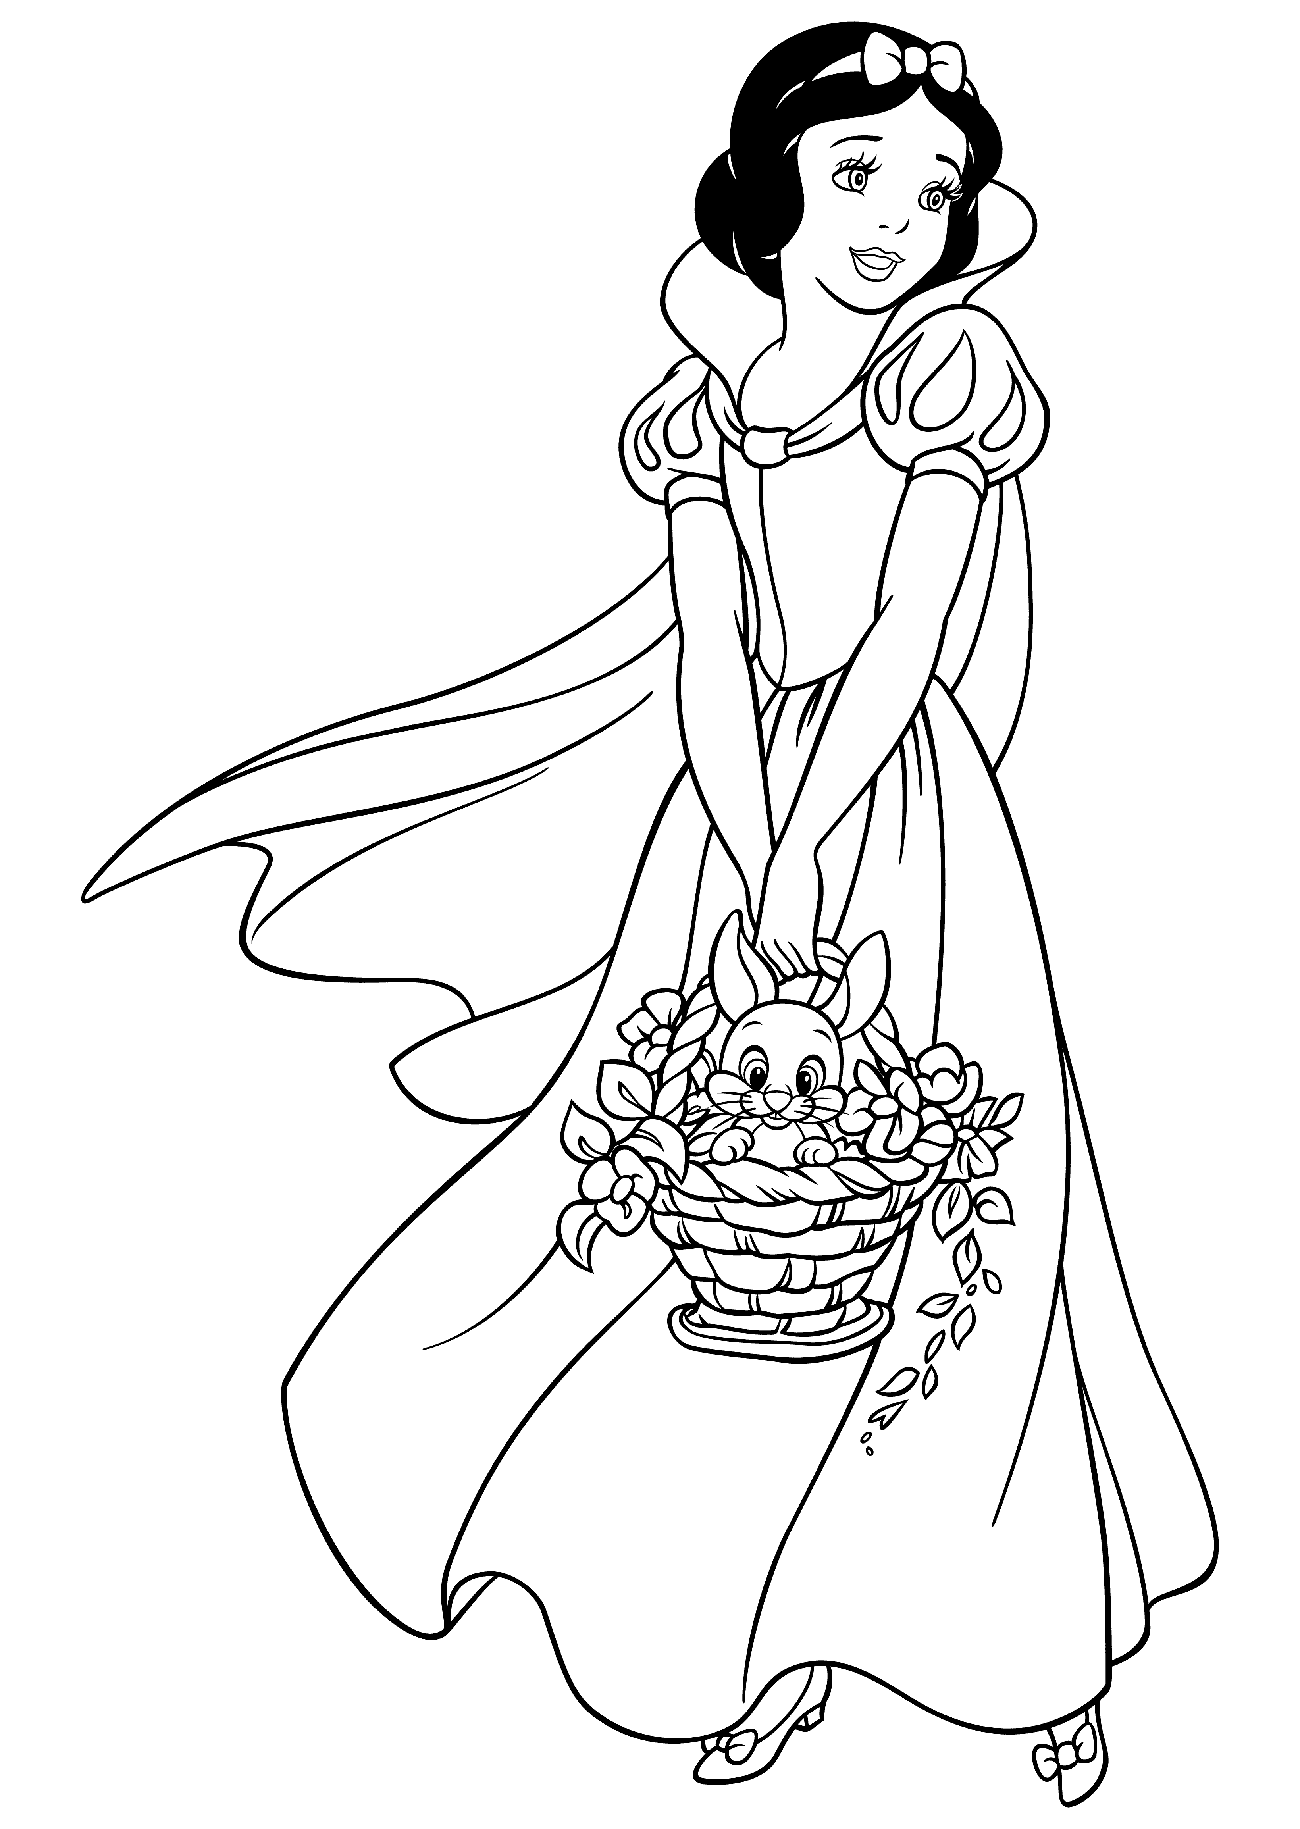 Coloring page   Snow White with a basket